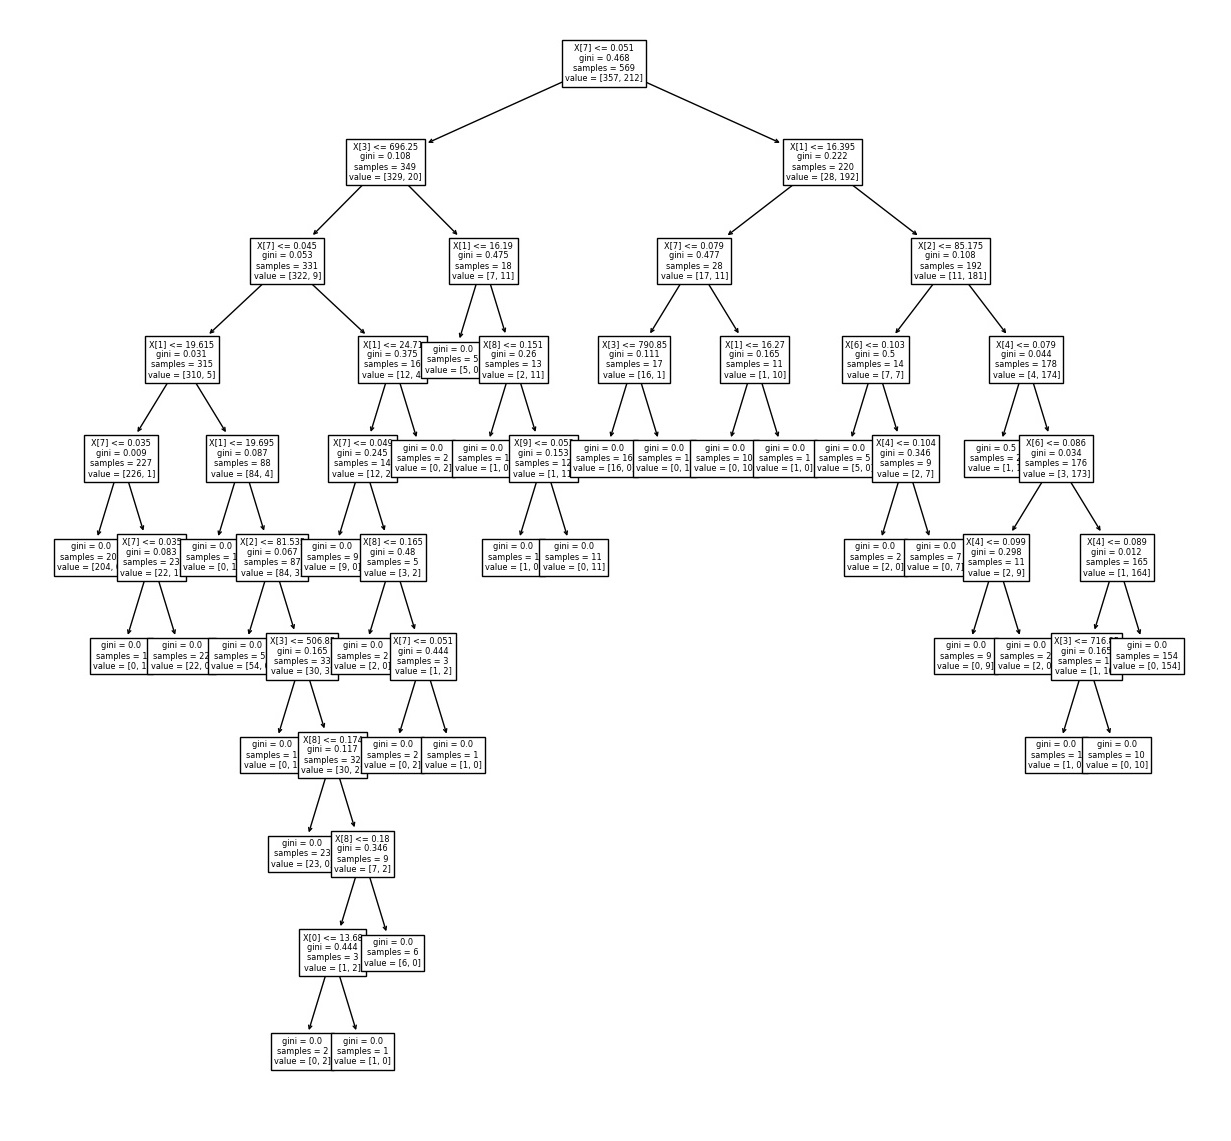 visualize sklearn decision tree